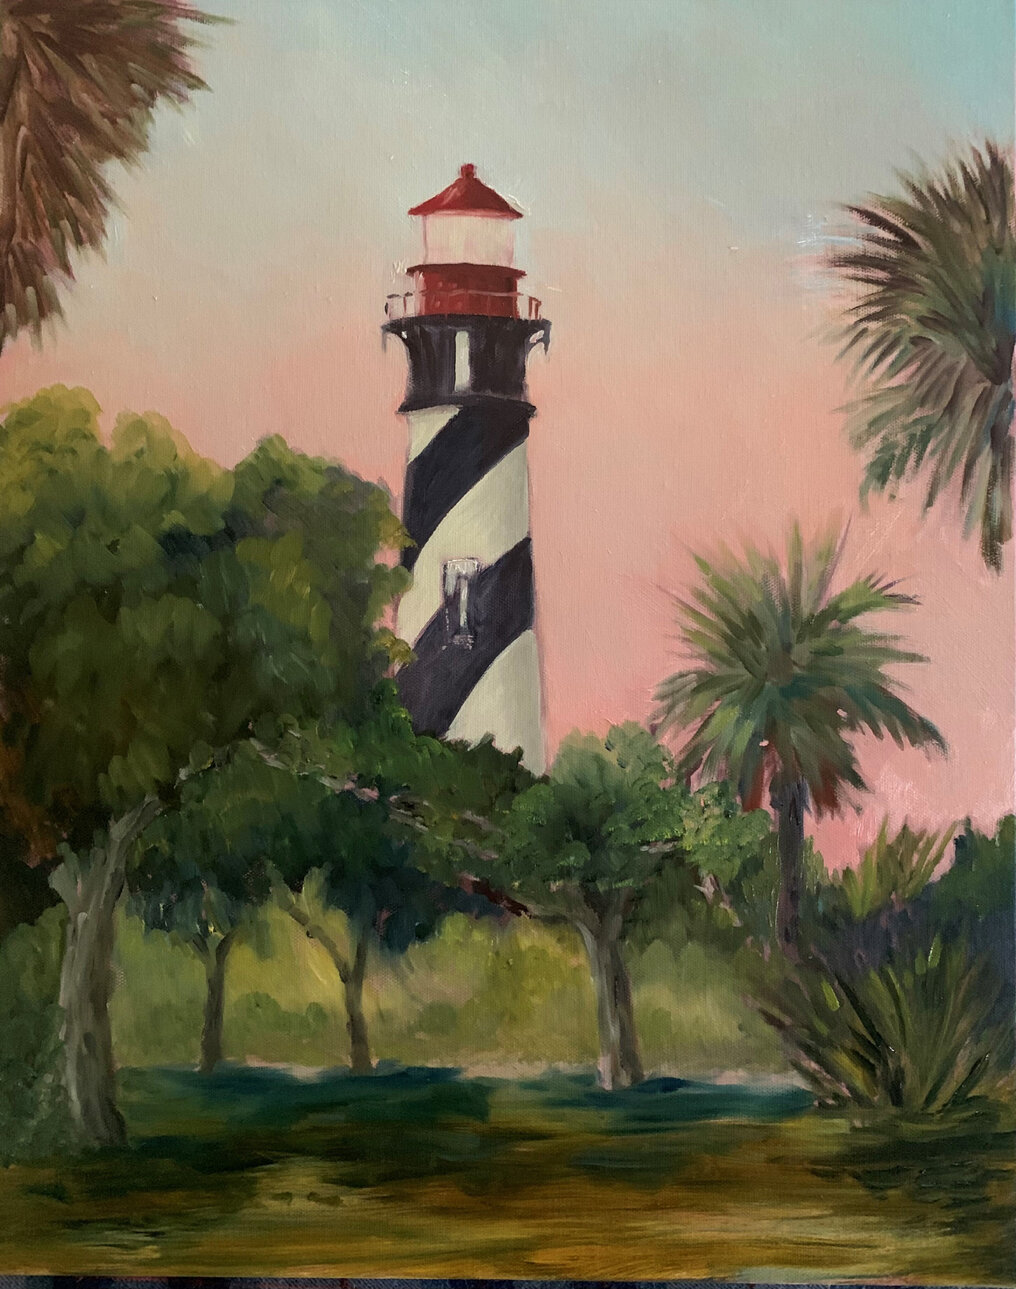 This plein air painting depicts the St. Augustine Lighthouse.